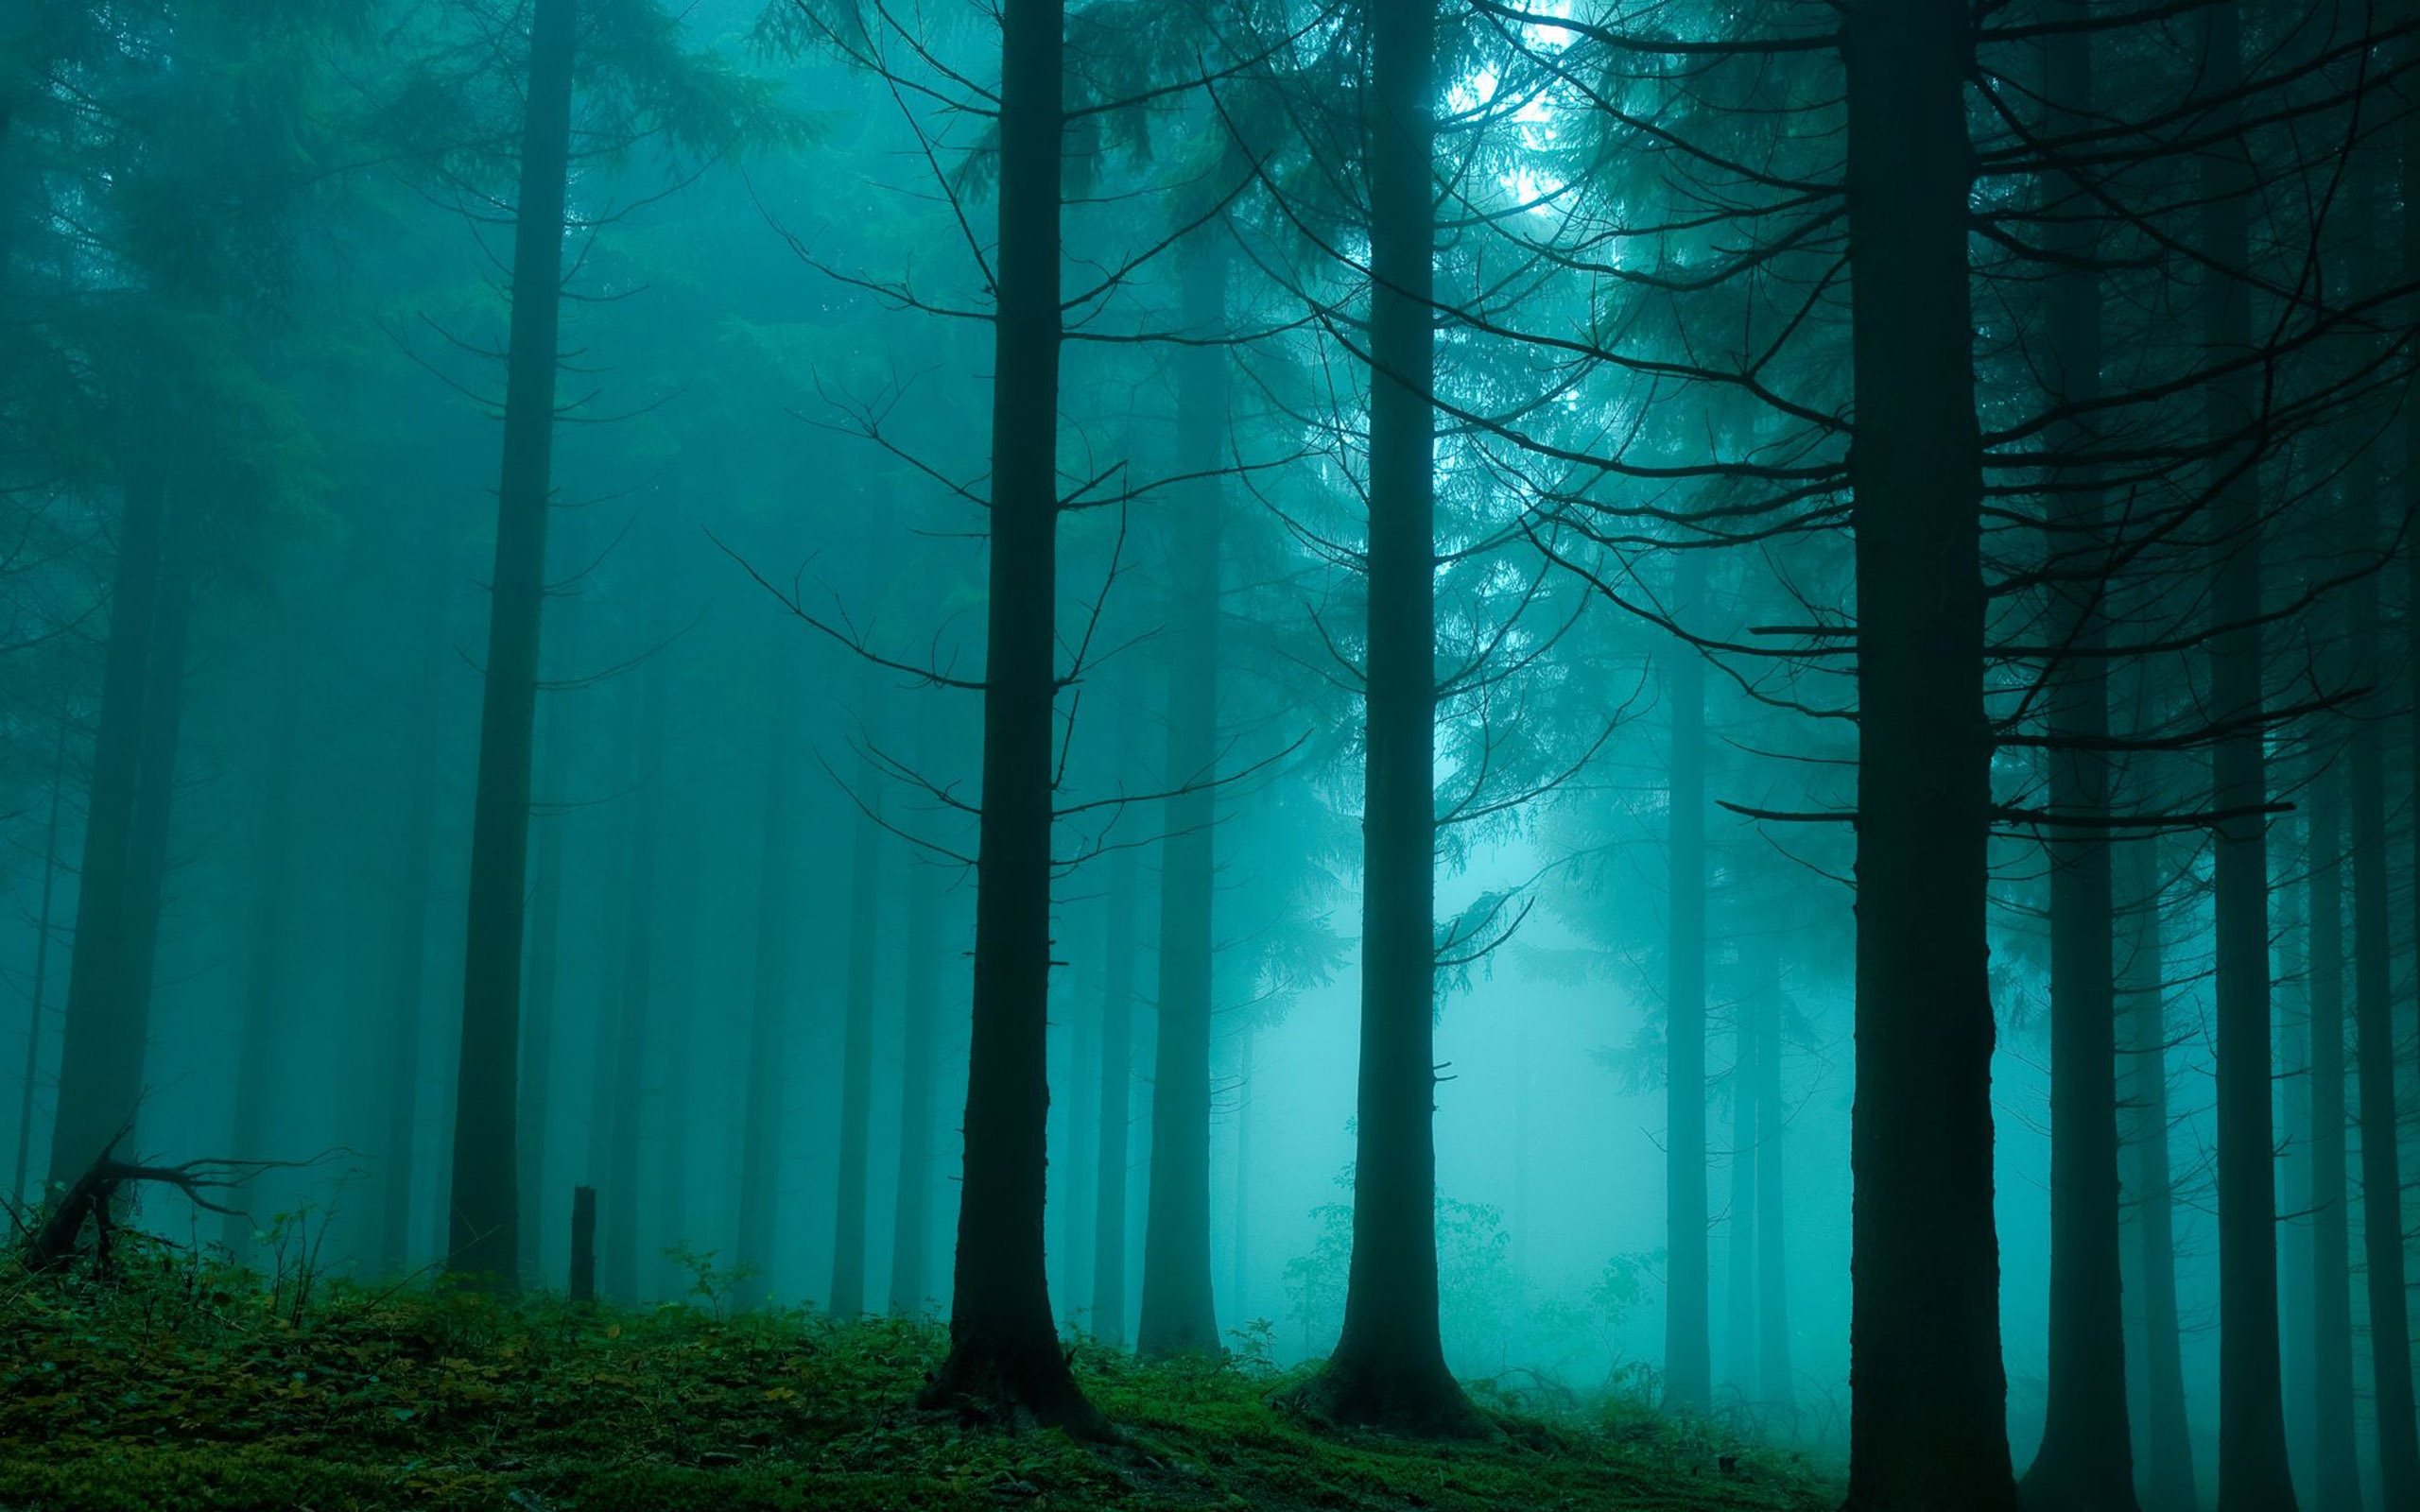 Forest In The Mist Nature Mac Wallpaper Download. Free Mac